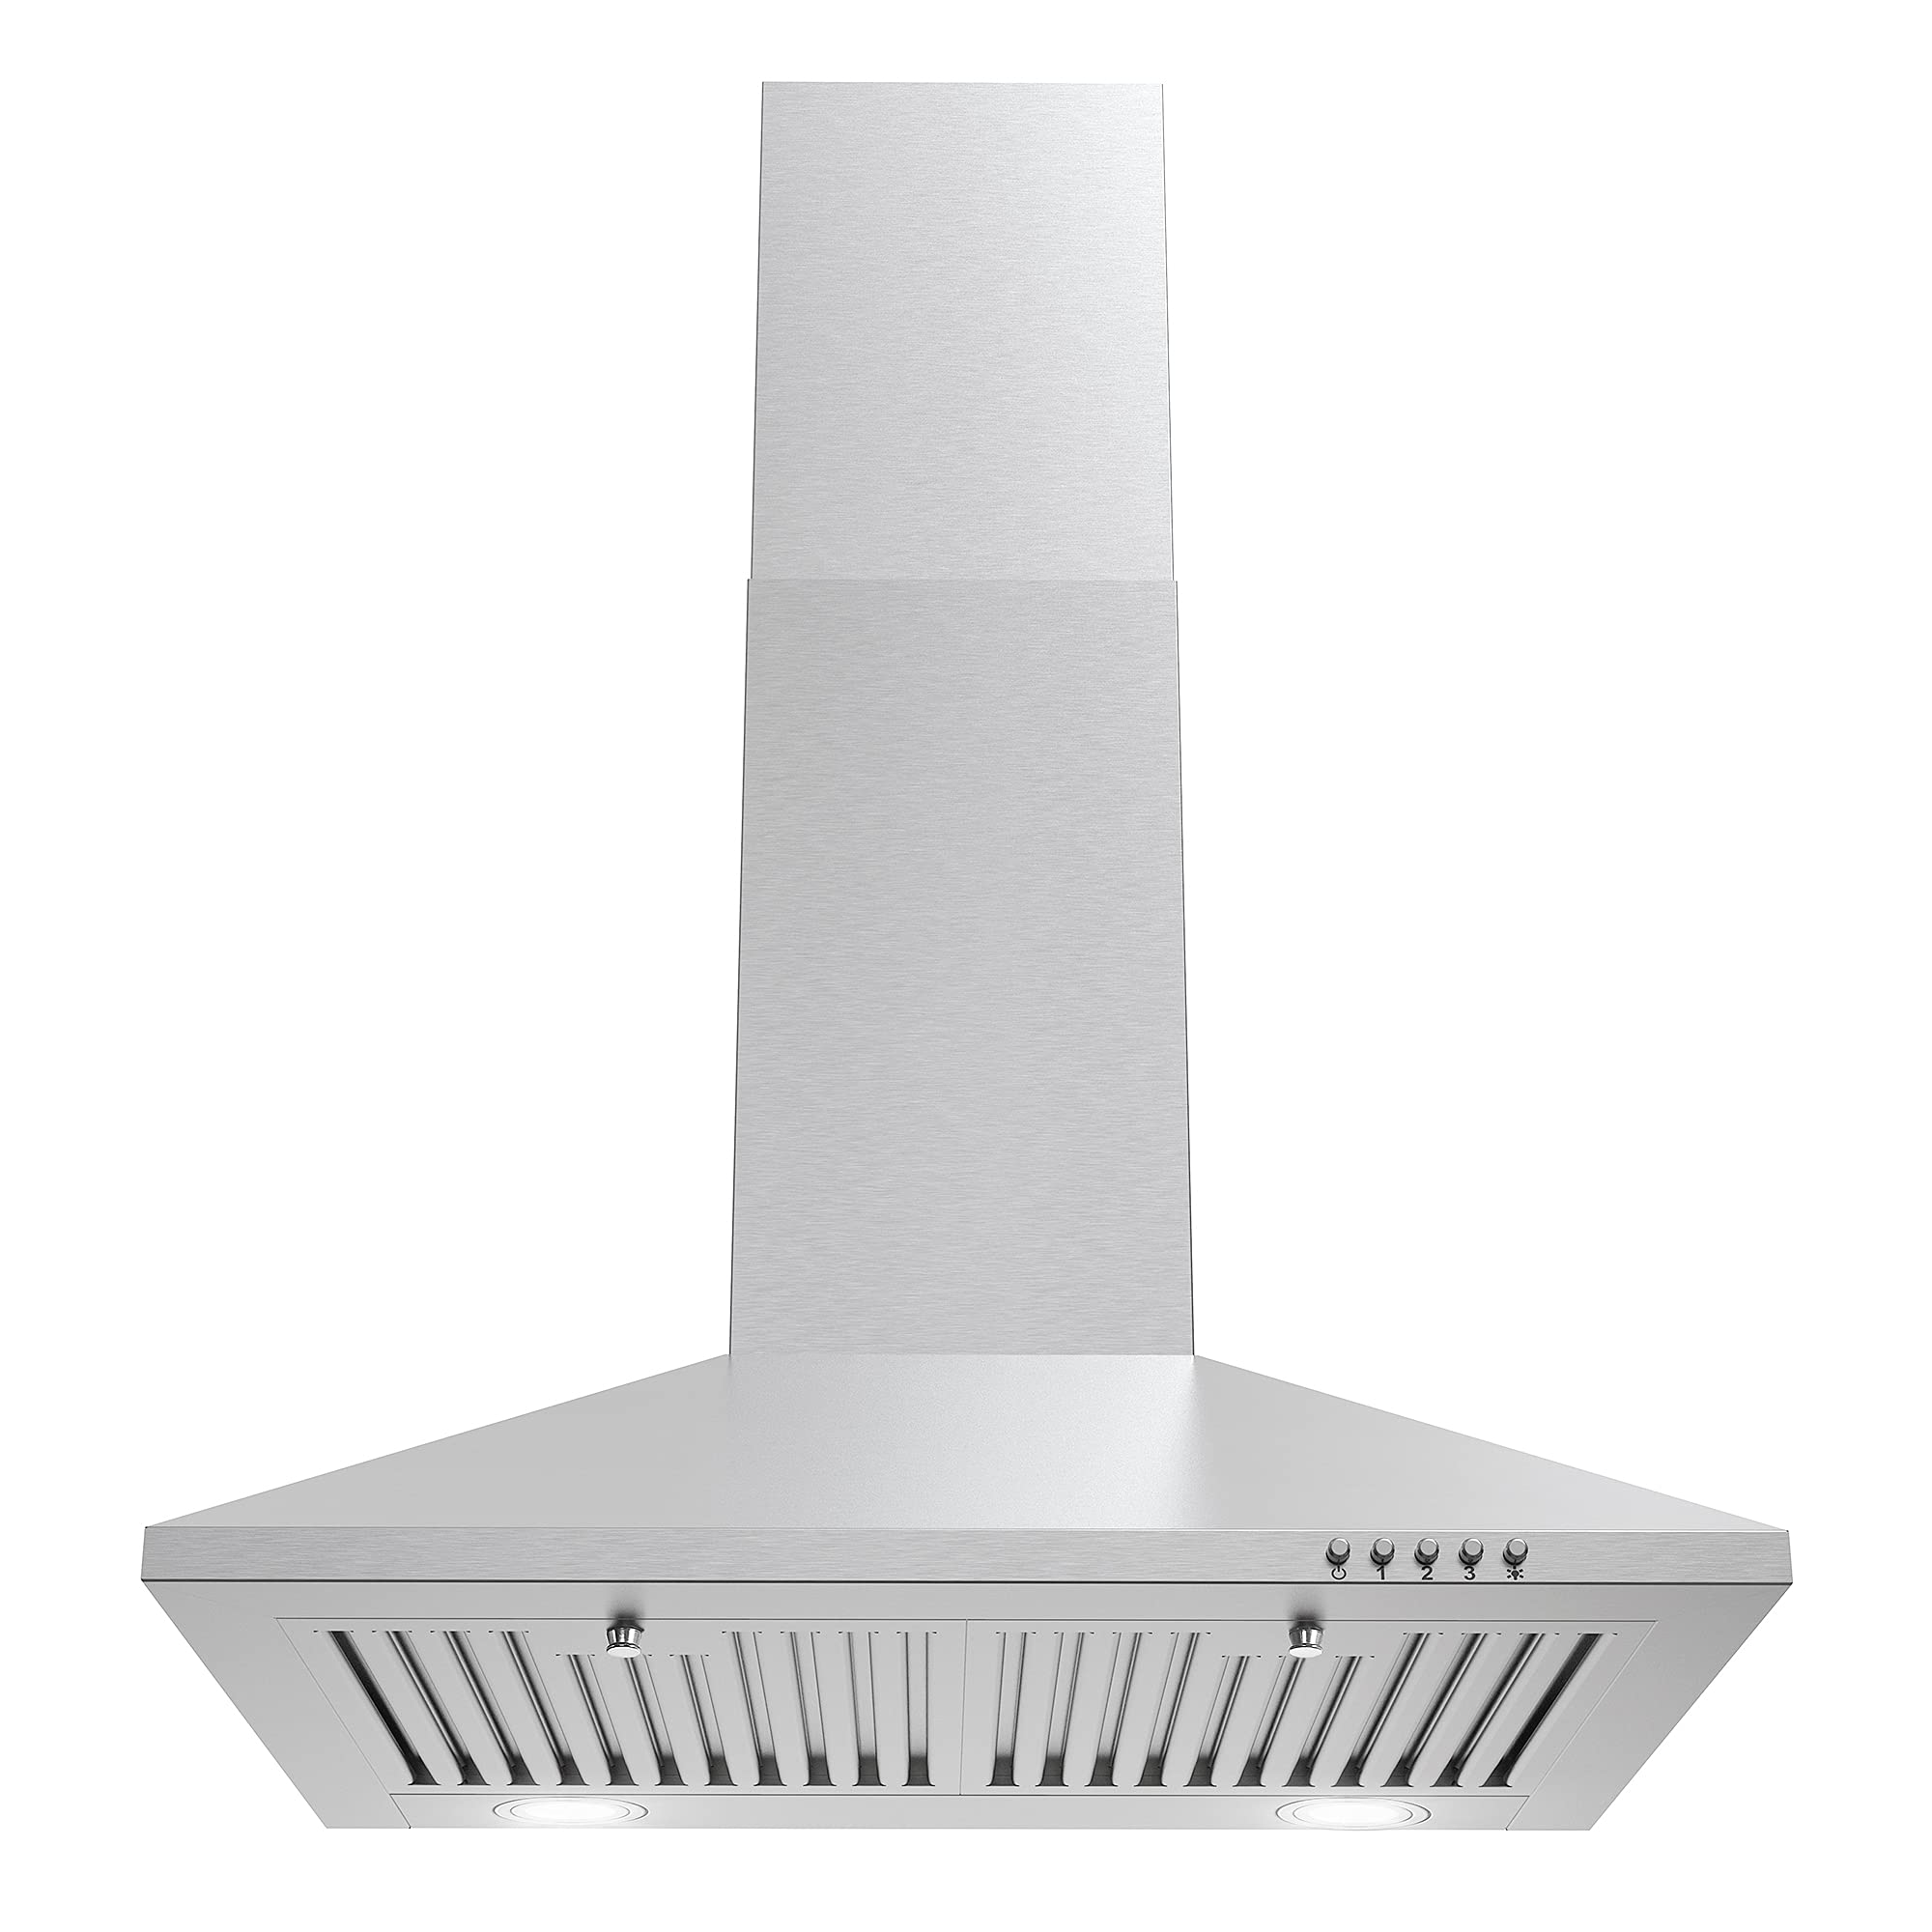 cOSMO cOS-6324EWH Wall Mount Range Hood, chimney-Style Over Stove Vent, 3 Speed Fan, Permanent Filters, LED Lights in Stainless 